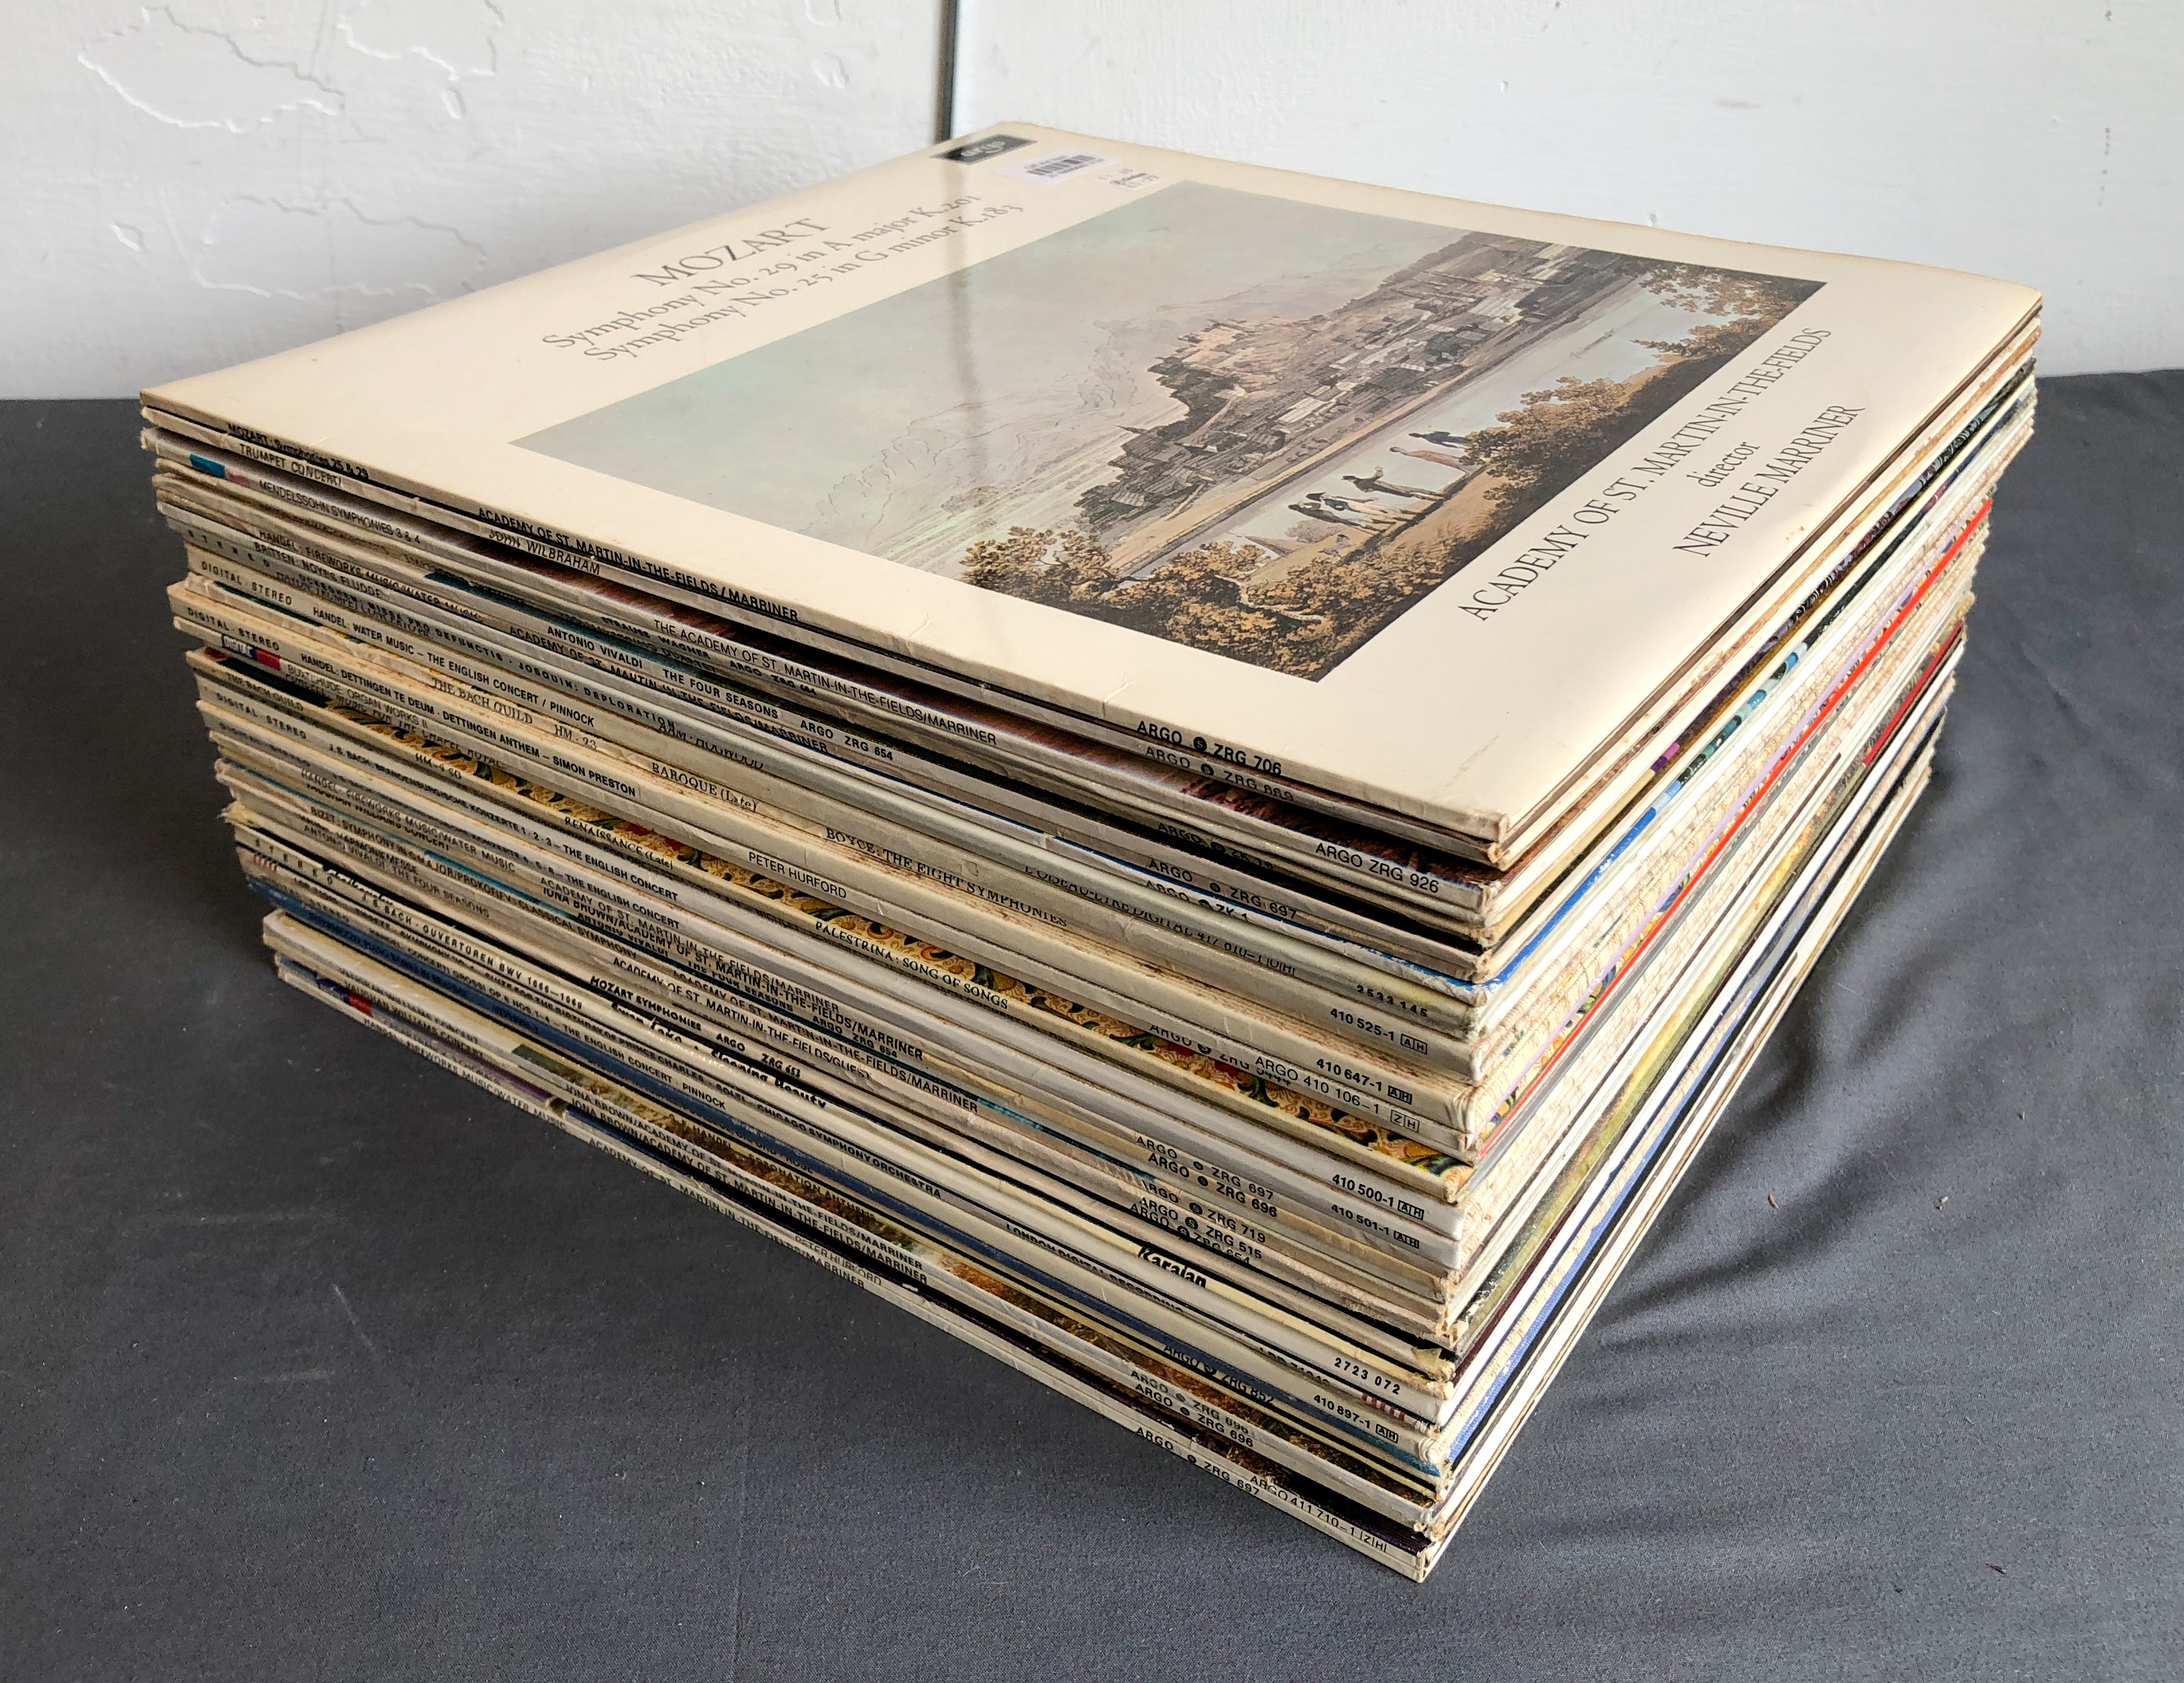 119 x classical vinyl LP records, mostly by EMI and Argo - 1970s-1980s, including 77 x EMI ASD - Image 3 of 4